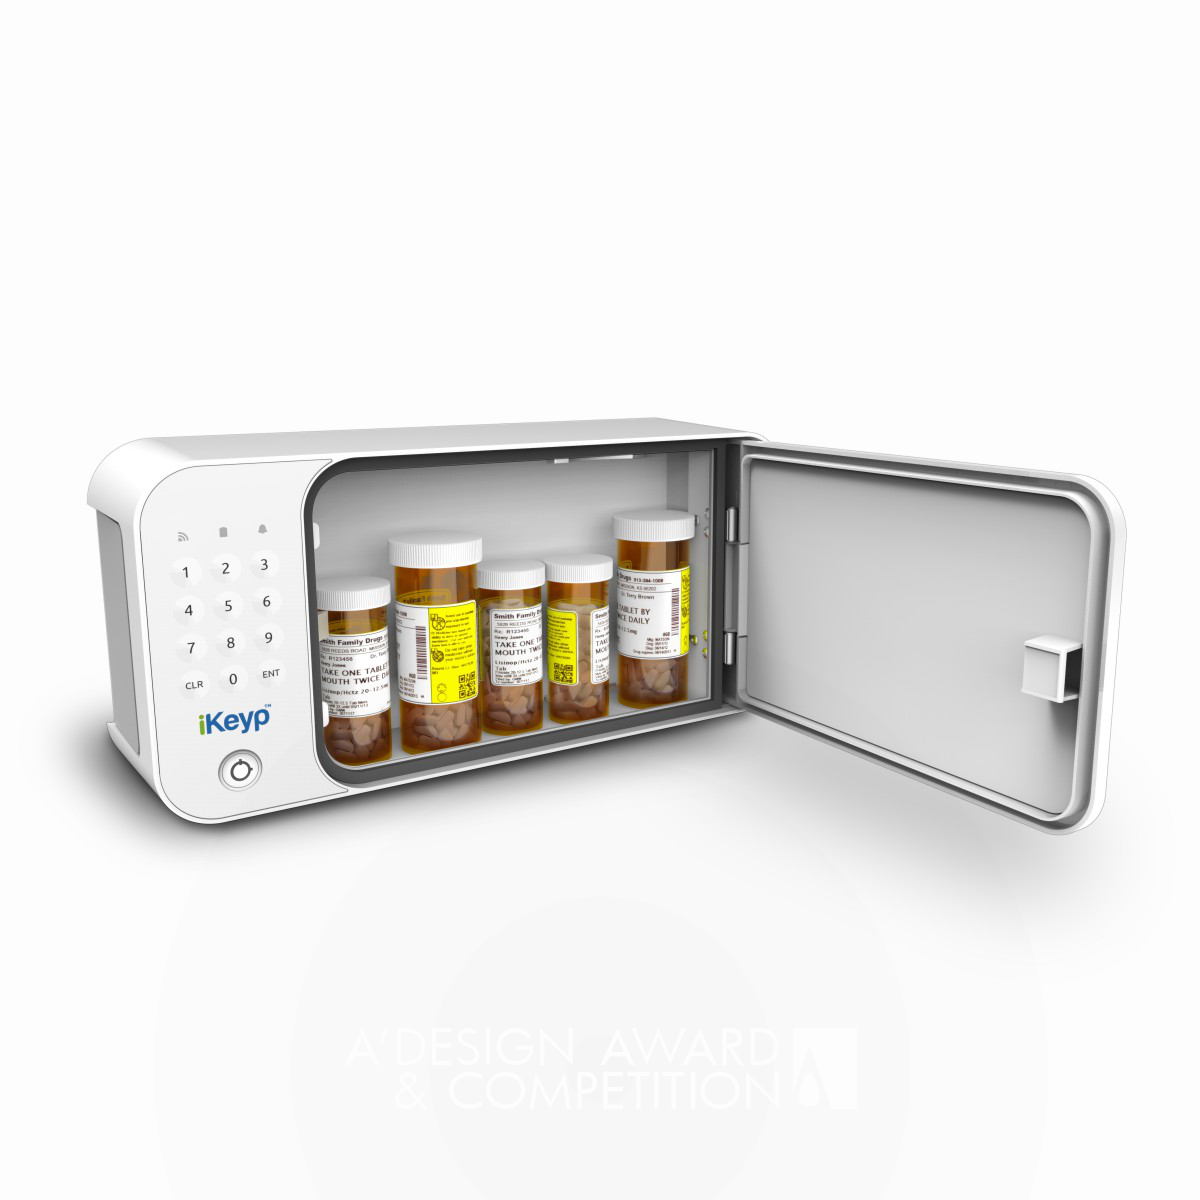 iKEYP Personal safe by Intelligent Product Solutions